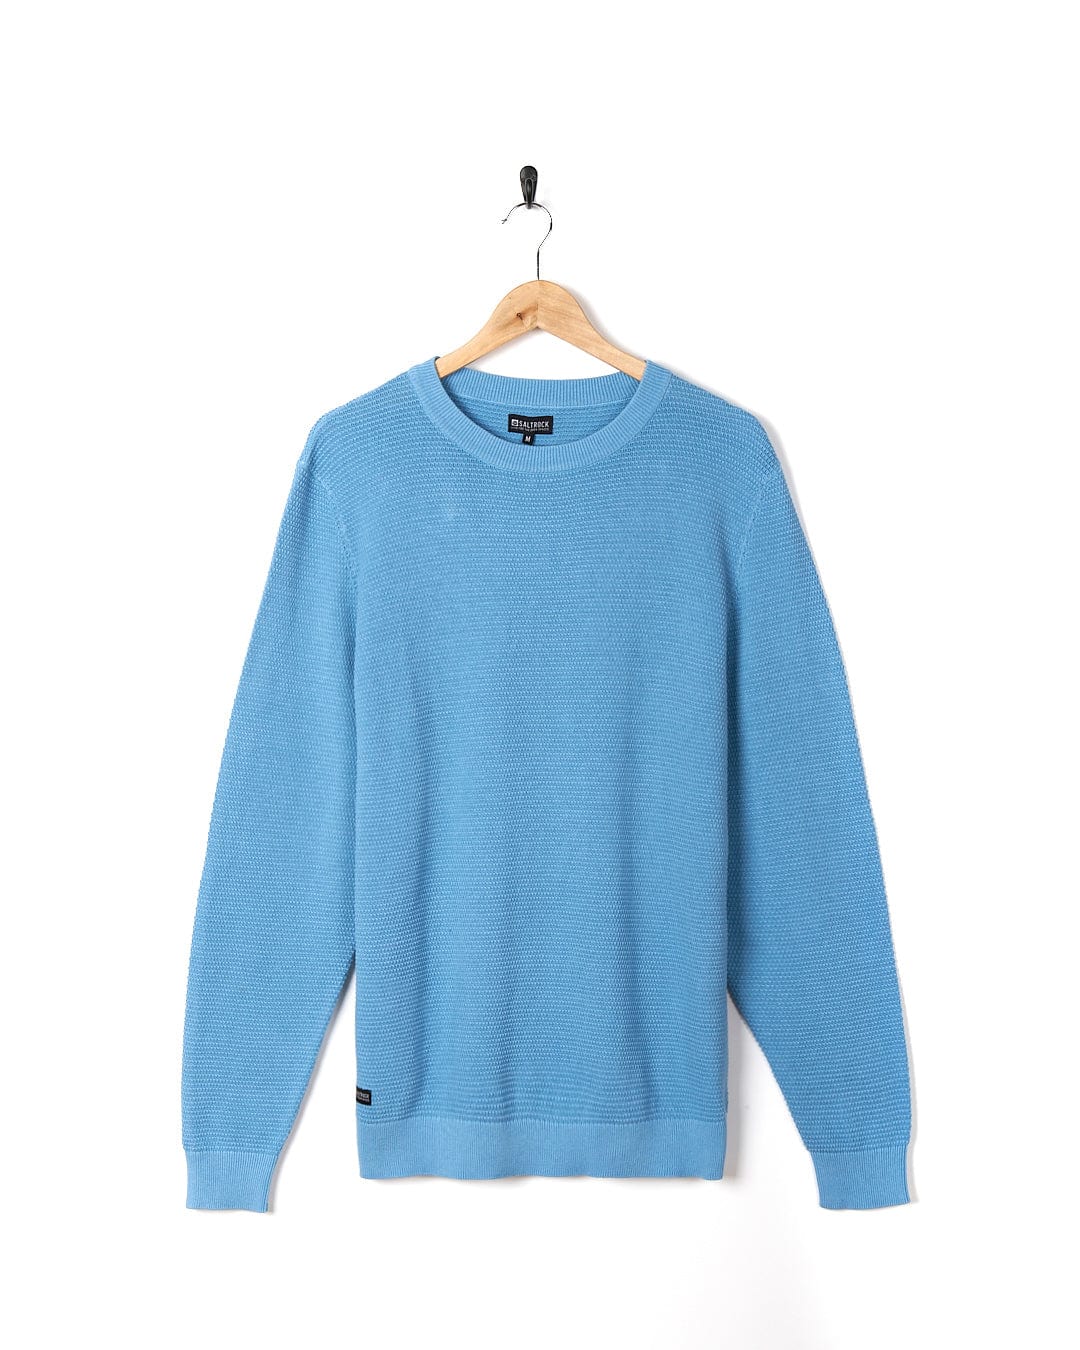 A Saltrock - Mens Washed Knitted Crew - Light Blue sweater hanging on a hanger.